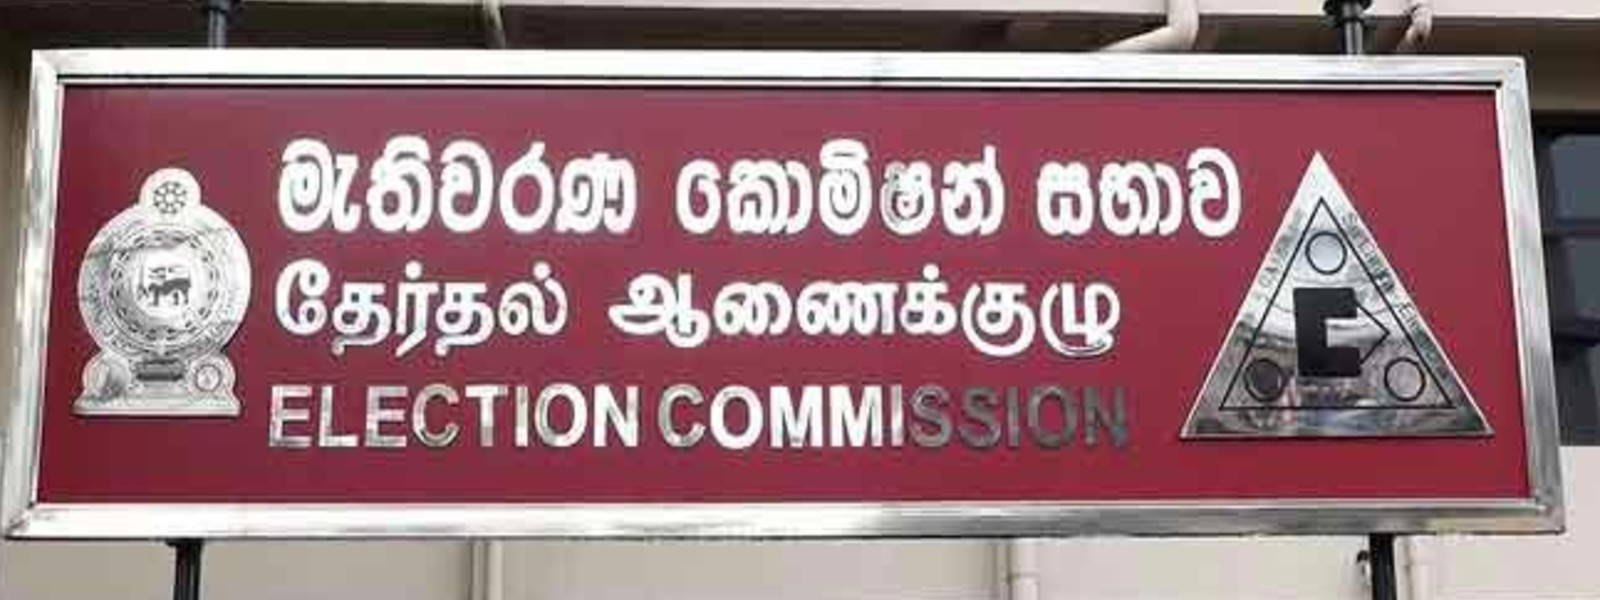 National Election Commission is to meet regarding the election